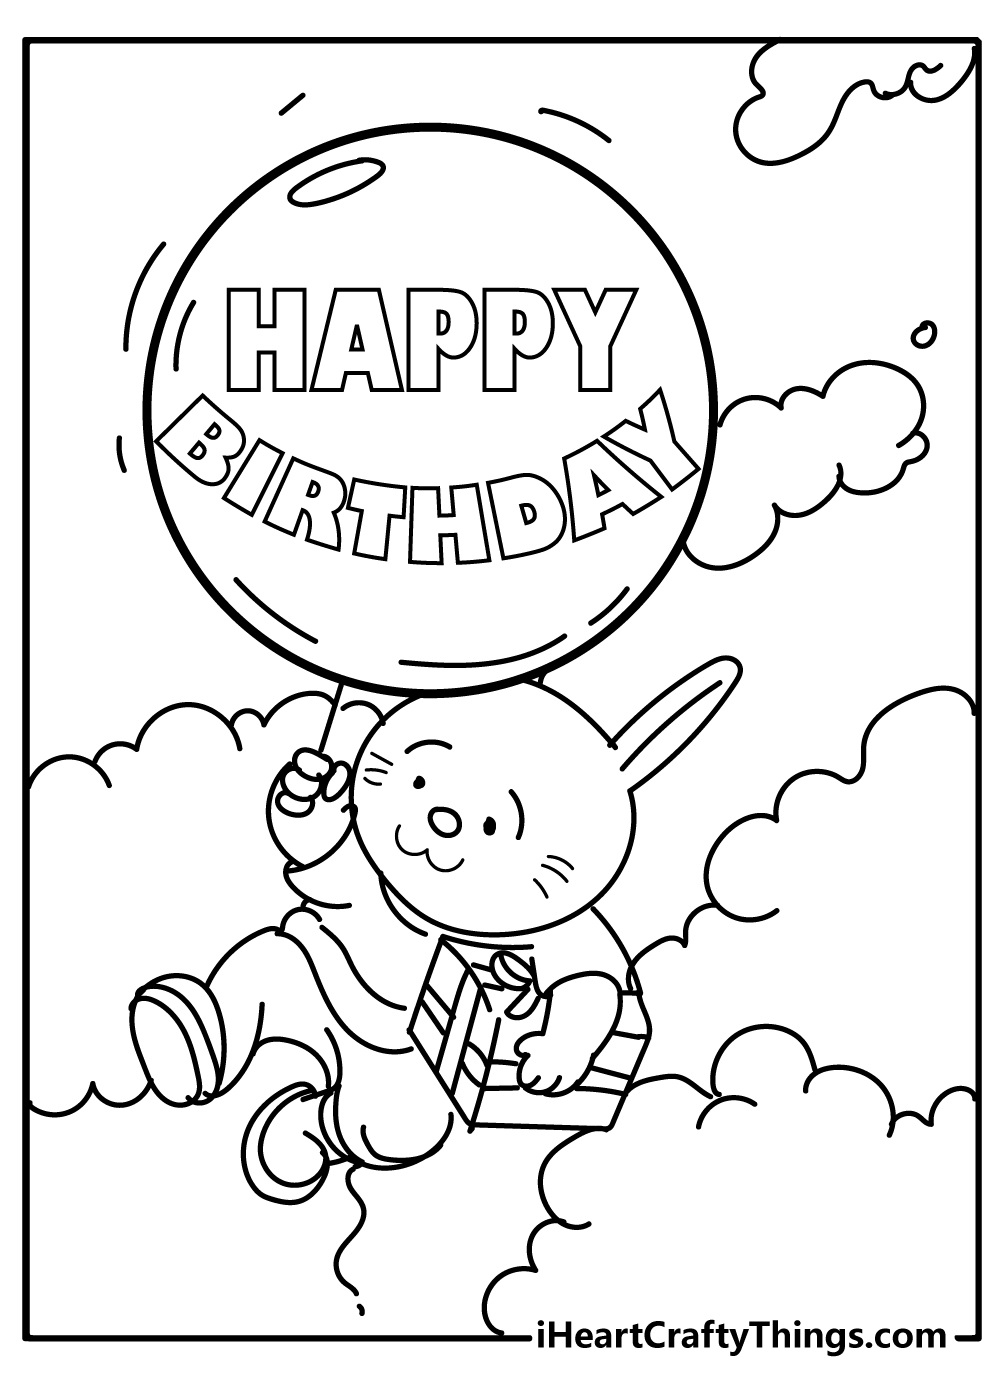 Happy Birthday Coloring Pages free download